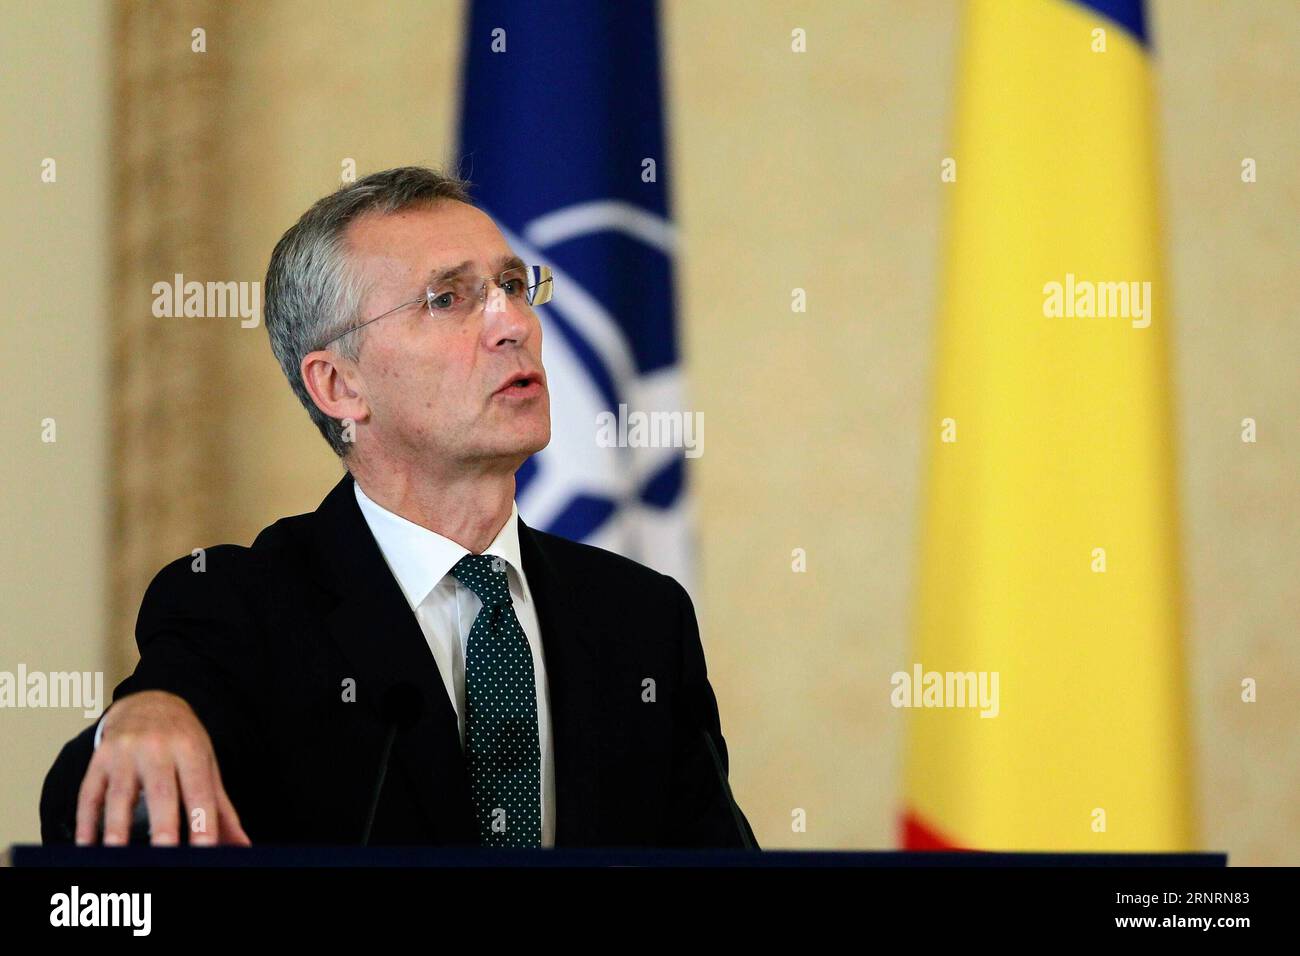 (171009) -- BUCHAREST, Oct. 9, 2017 -- NATO Secretary General Jens Stoltenberg attends a joint press conference with Romanian President Klaus Iohannis (unseen) in Bucharest, Romania, on Oct. 9, 2017. A plenary session of the NATO parliamentary assembly on Monday was held in Bucharest, capital of Romania, with the participation of parliamentarians from NATO allies and partners. ) (dtf) ROMANIA-BUCHAREST-NATO PARLIAMENTARY ASSEMBLY-PLENARY SESSION CristianxCristel PUBLICATIONxNOTxINxCHN Stock Photo